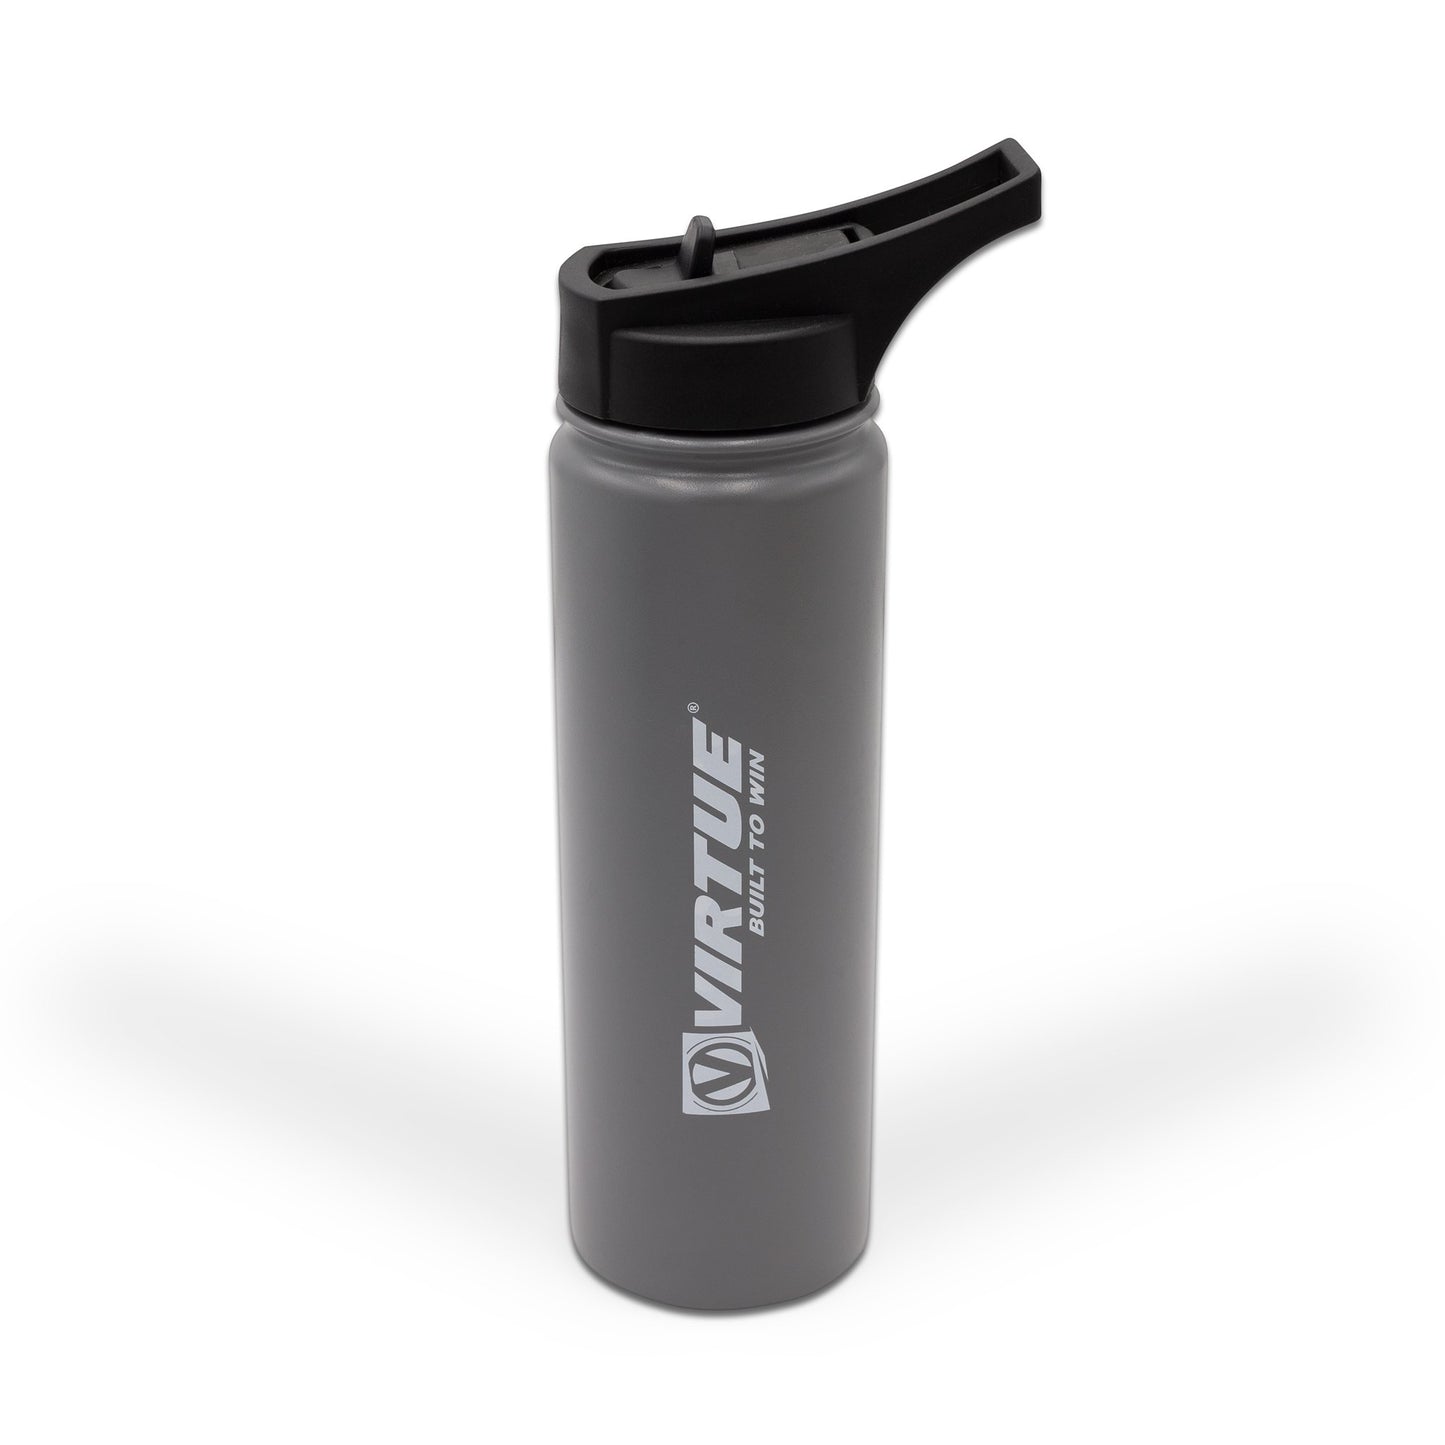 Virtue Stainless Steel 24Hr Cool Water Bottle - 22oz - Gray